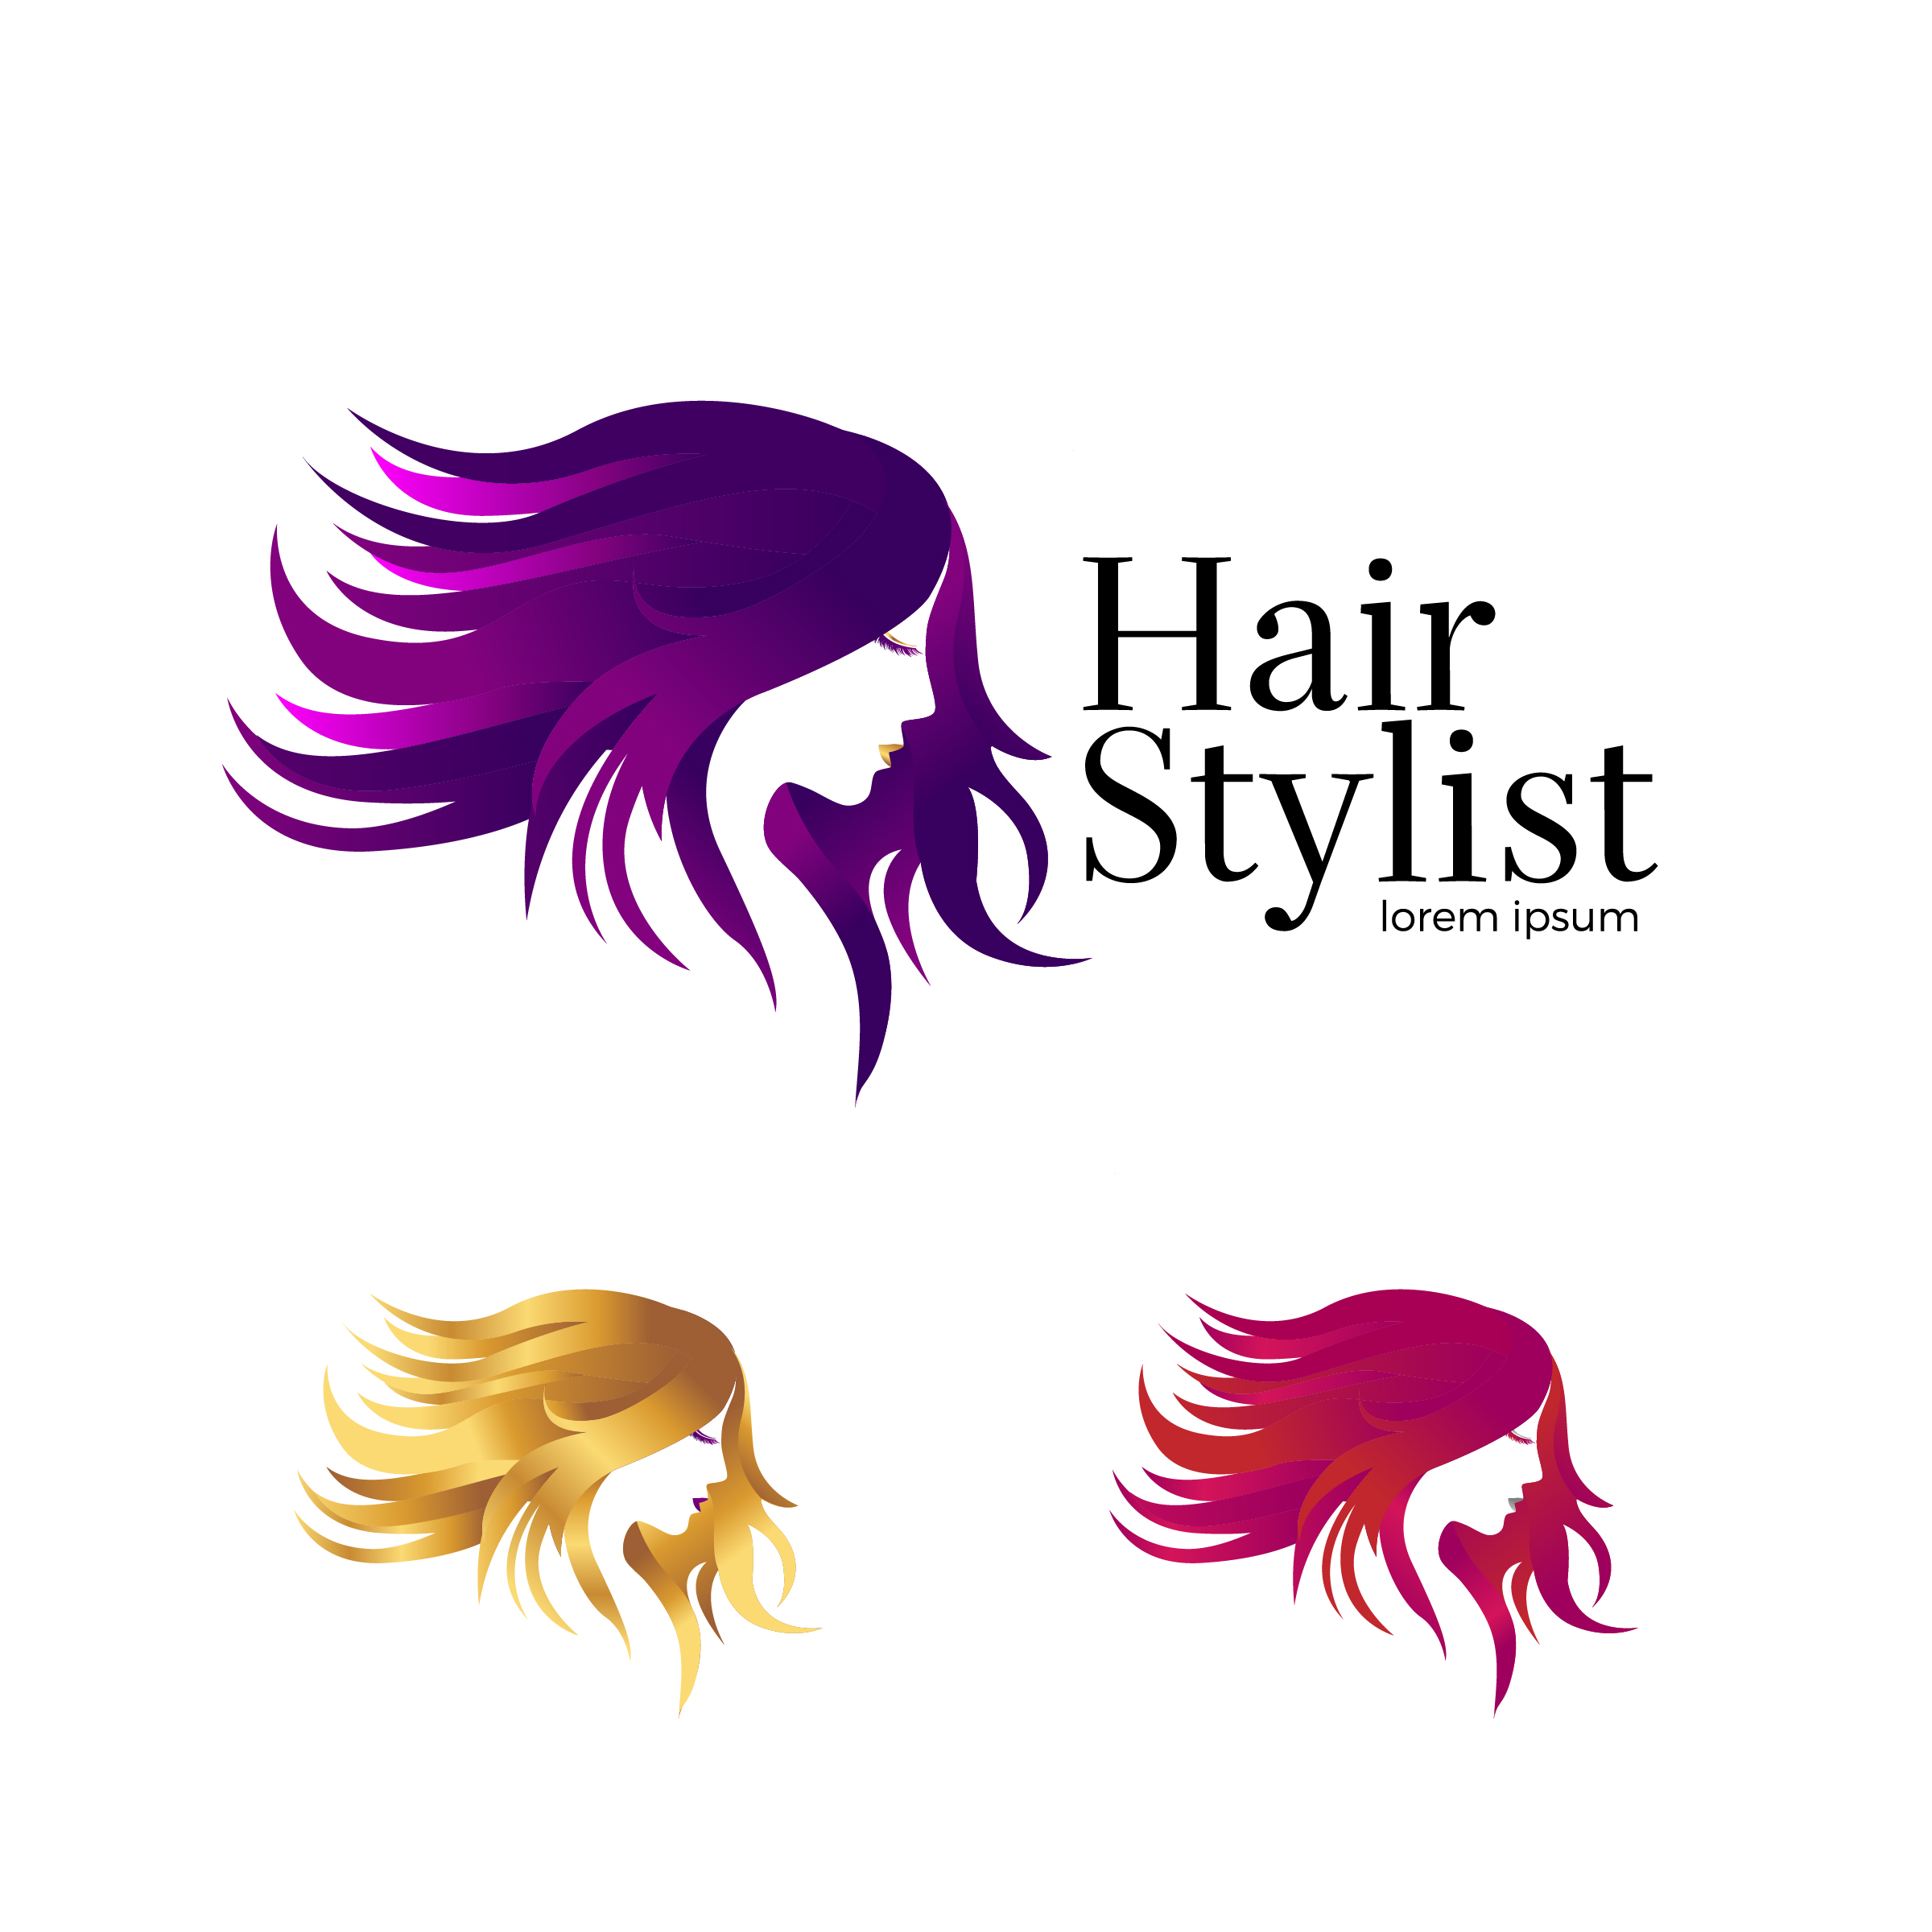 Beauty Salon Logo Ideas To Inspire You For Your Own Images